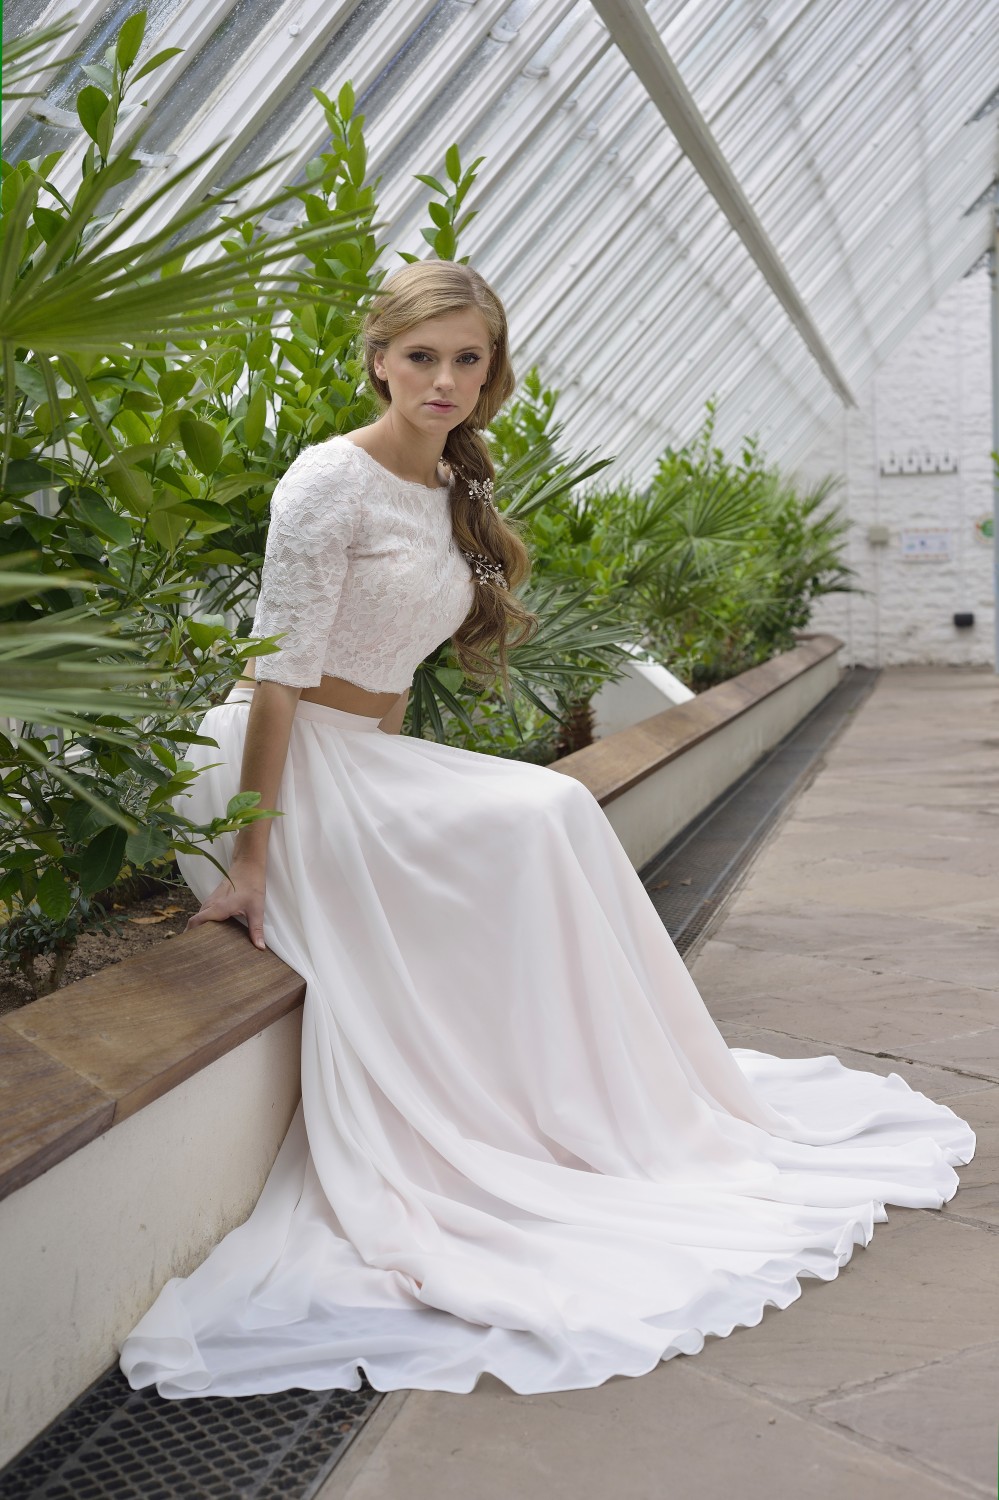 Dress in Love, Hollywood Glam, Sandals Resorts, Charlotte Tilbury, Event, Wedding Dresses, Dresses with Sleeves 